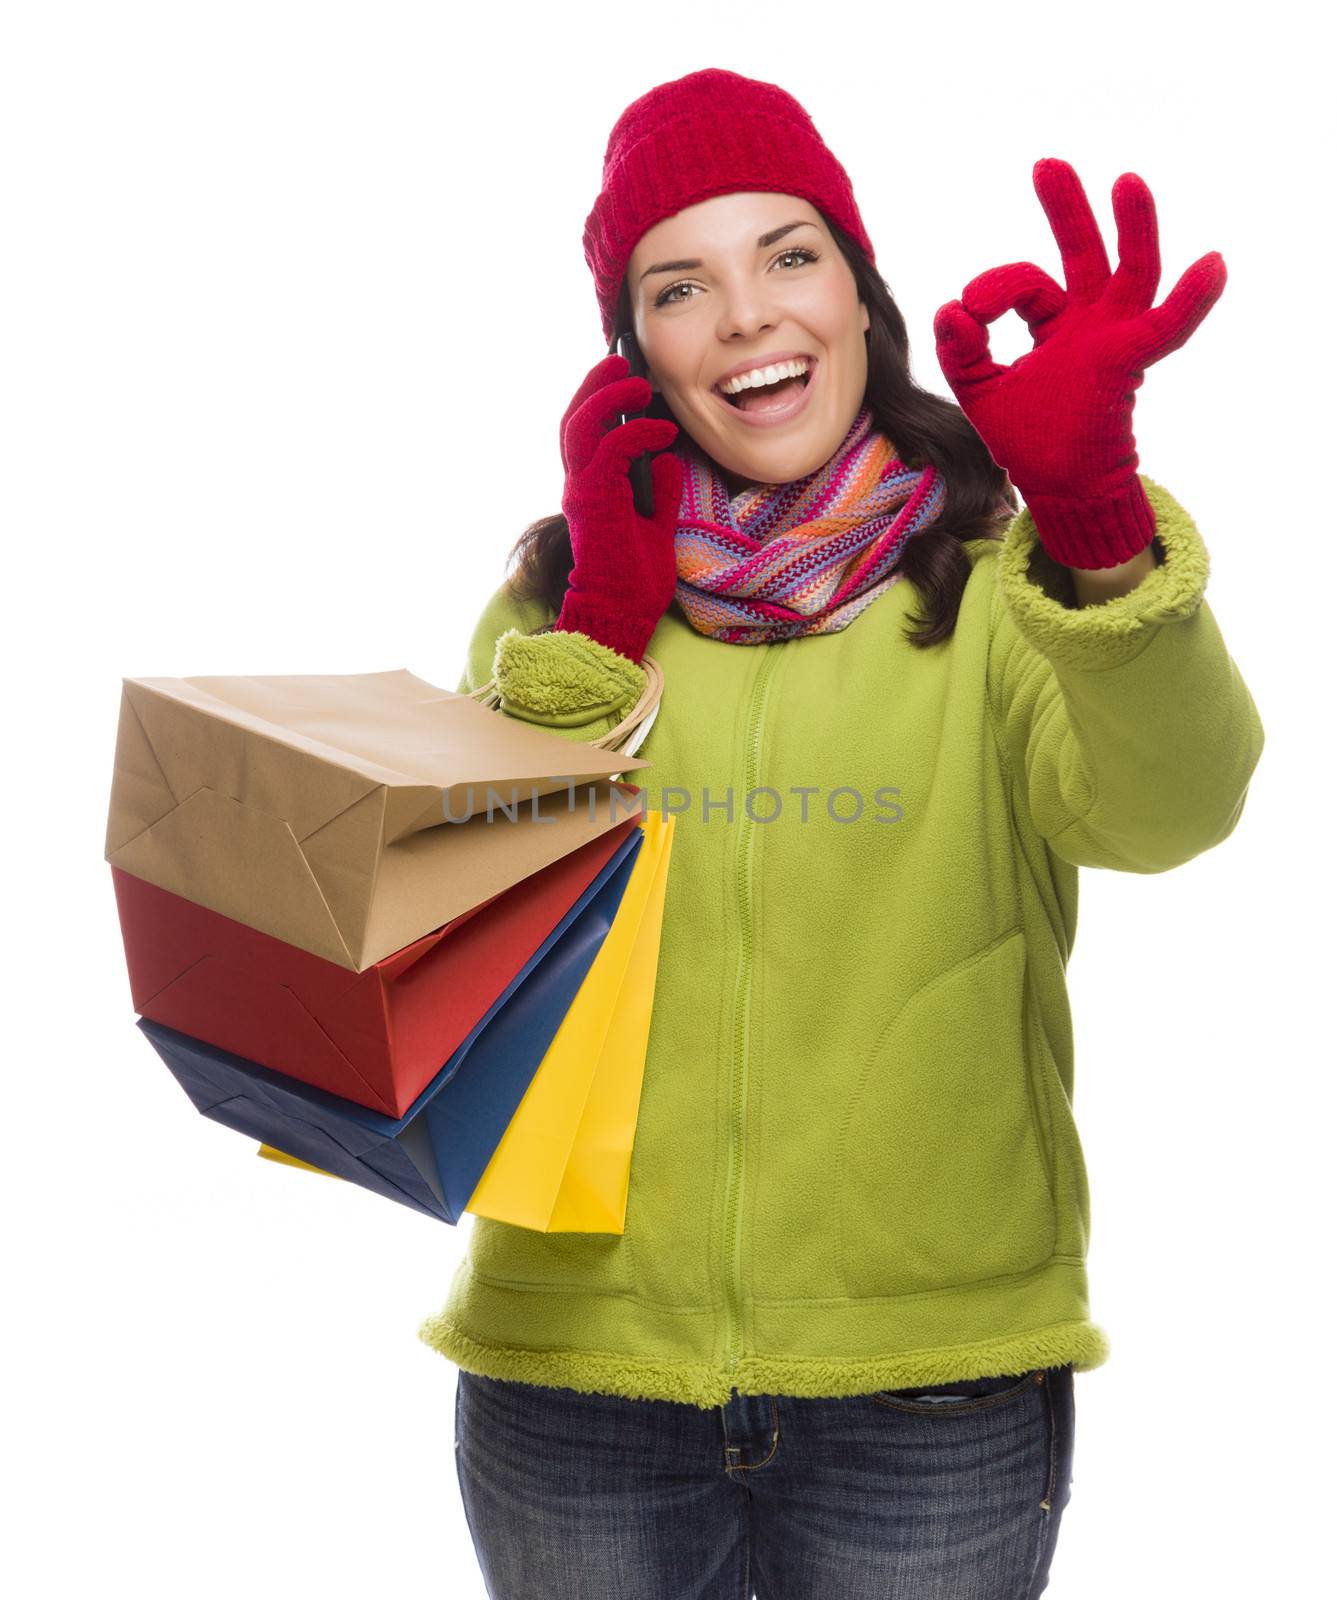 Mixed Race Woman Holding Shopping Bags On Phone Ok Gesture
 by Feverpitched